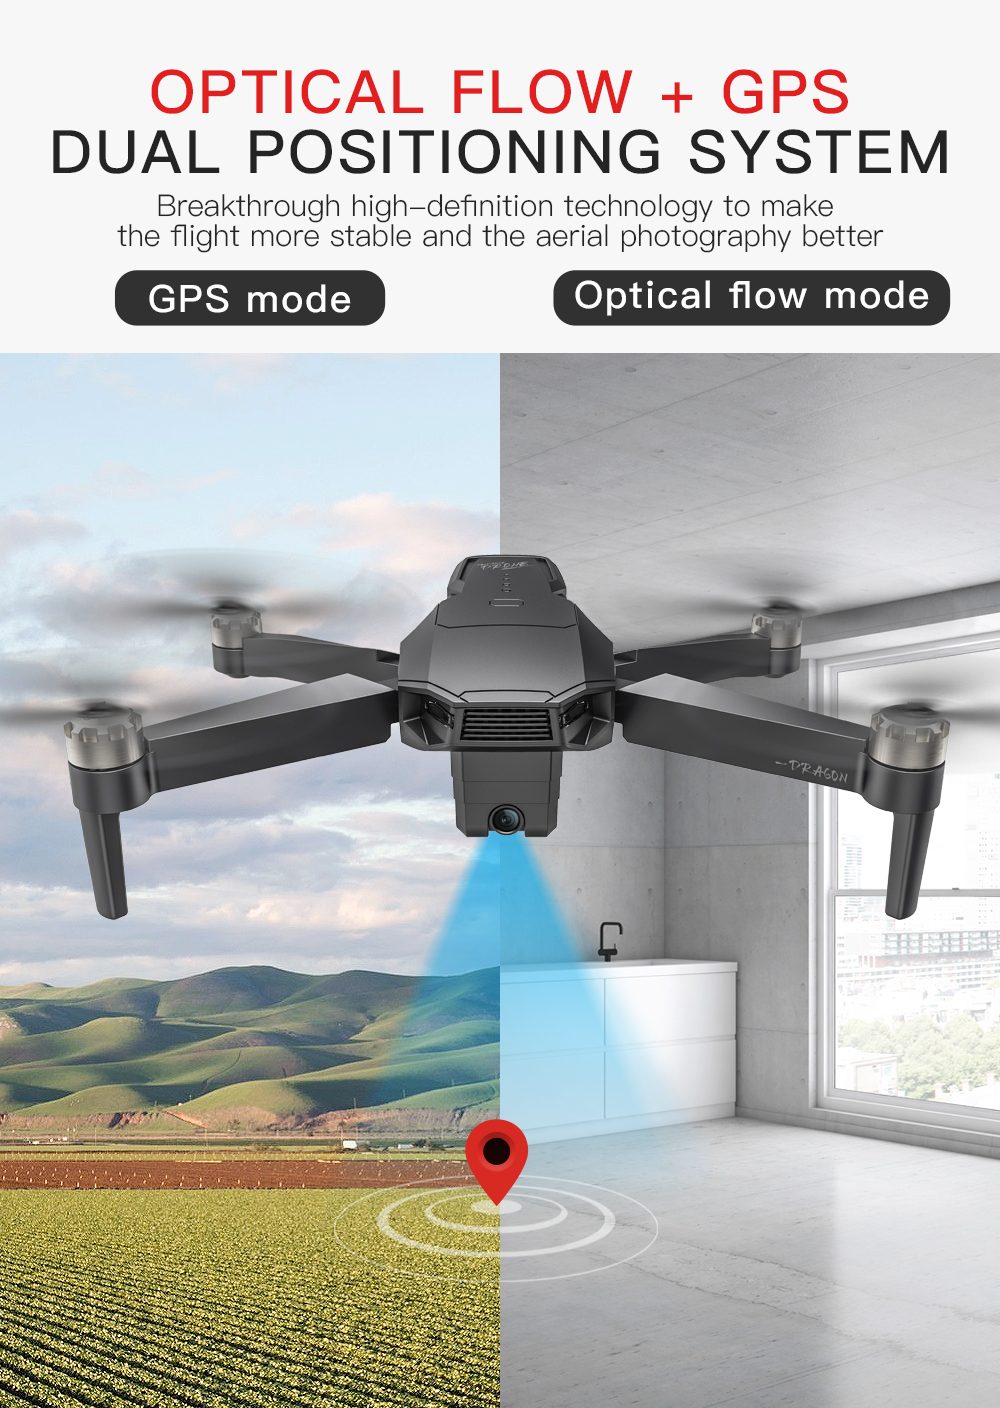 KF107-GPS-5G-WiFi-12KM-FPV-with-4K-Servo-Camera-Optical-Flow-Positioning-Brushless-Foldable-RC-Drone-1740852-8